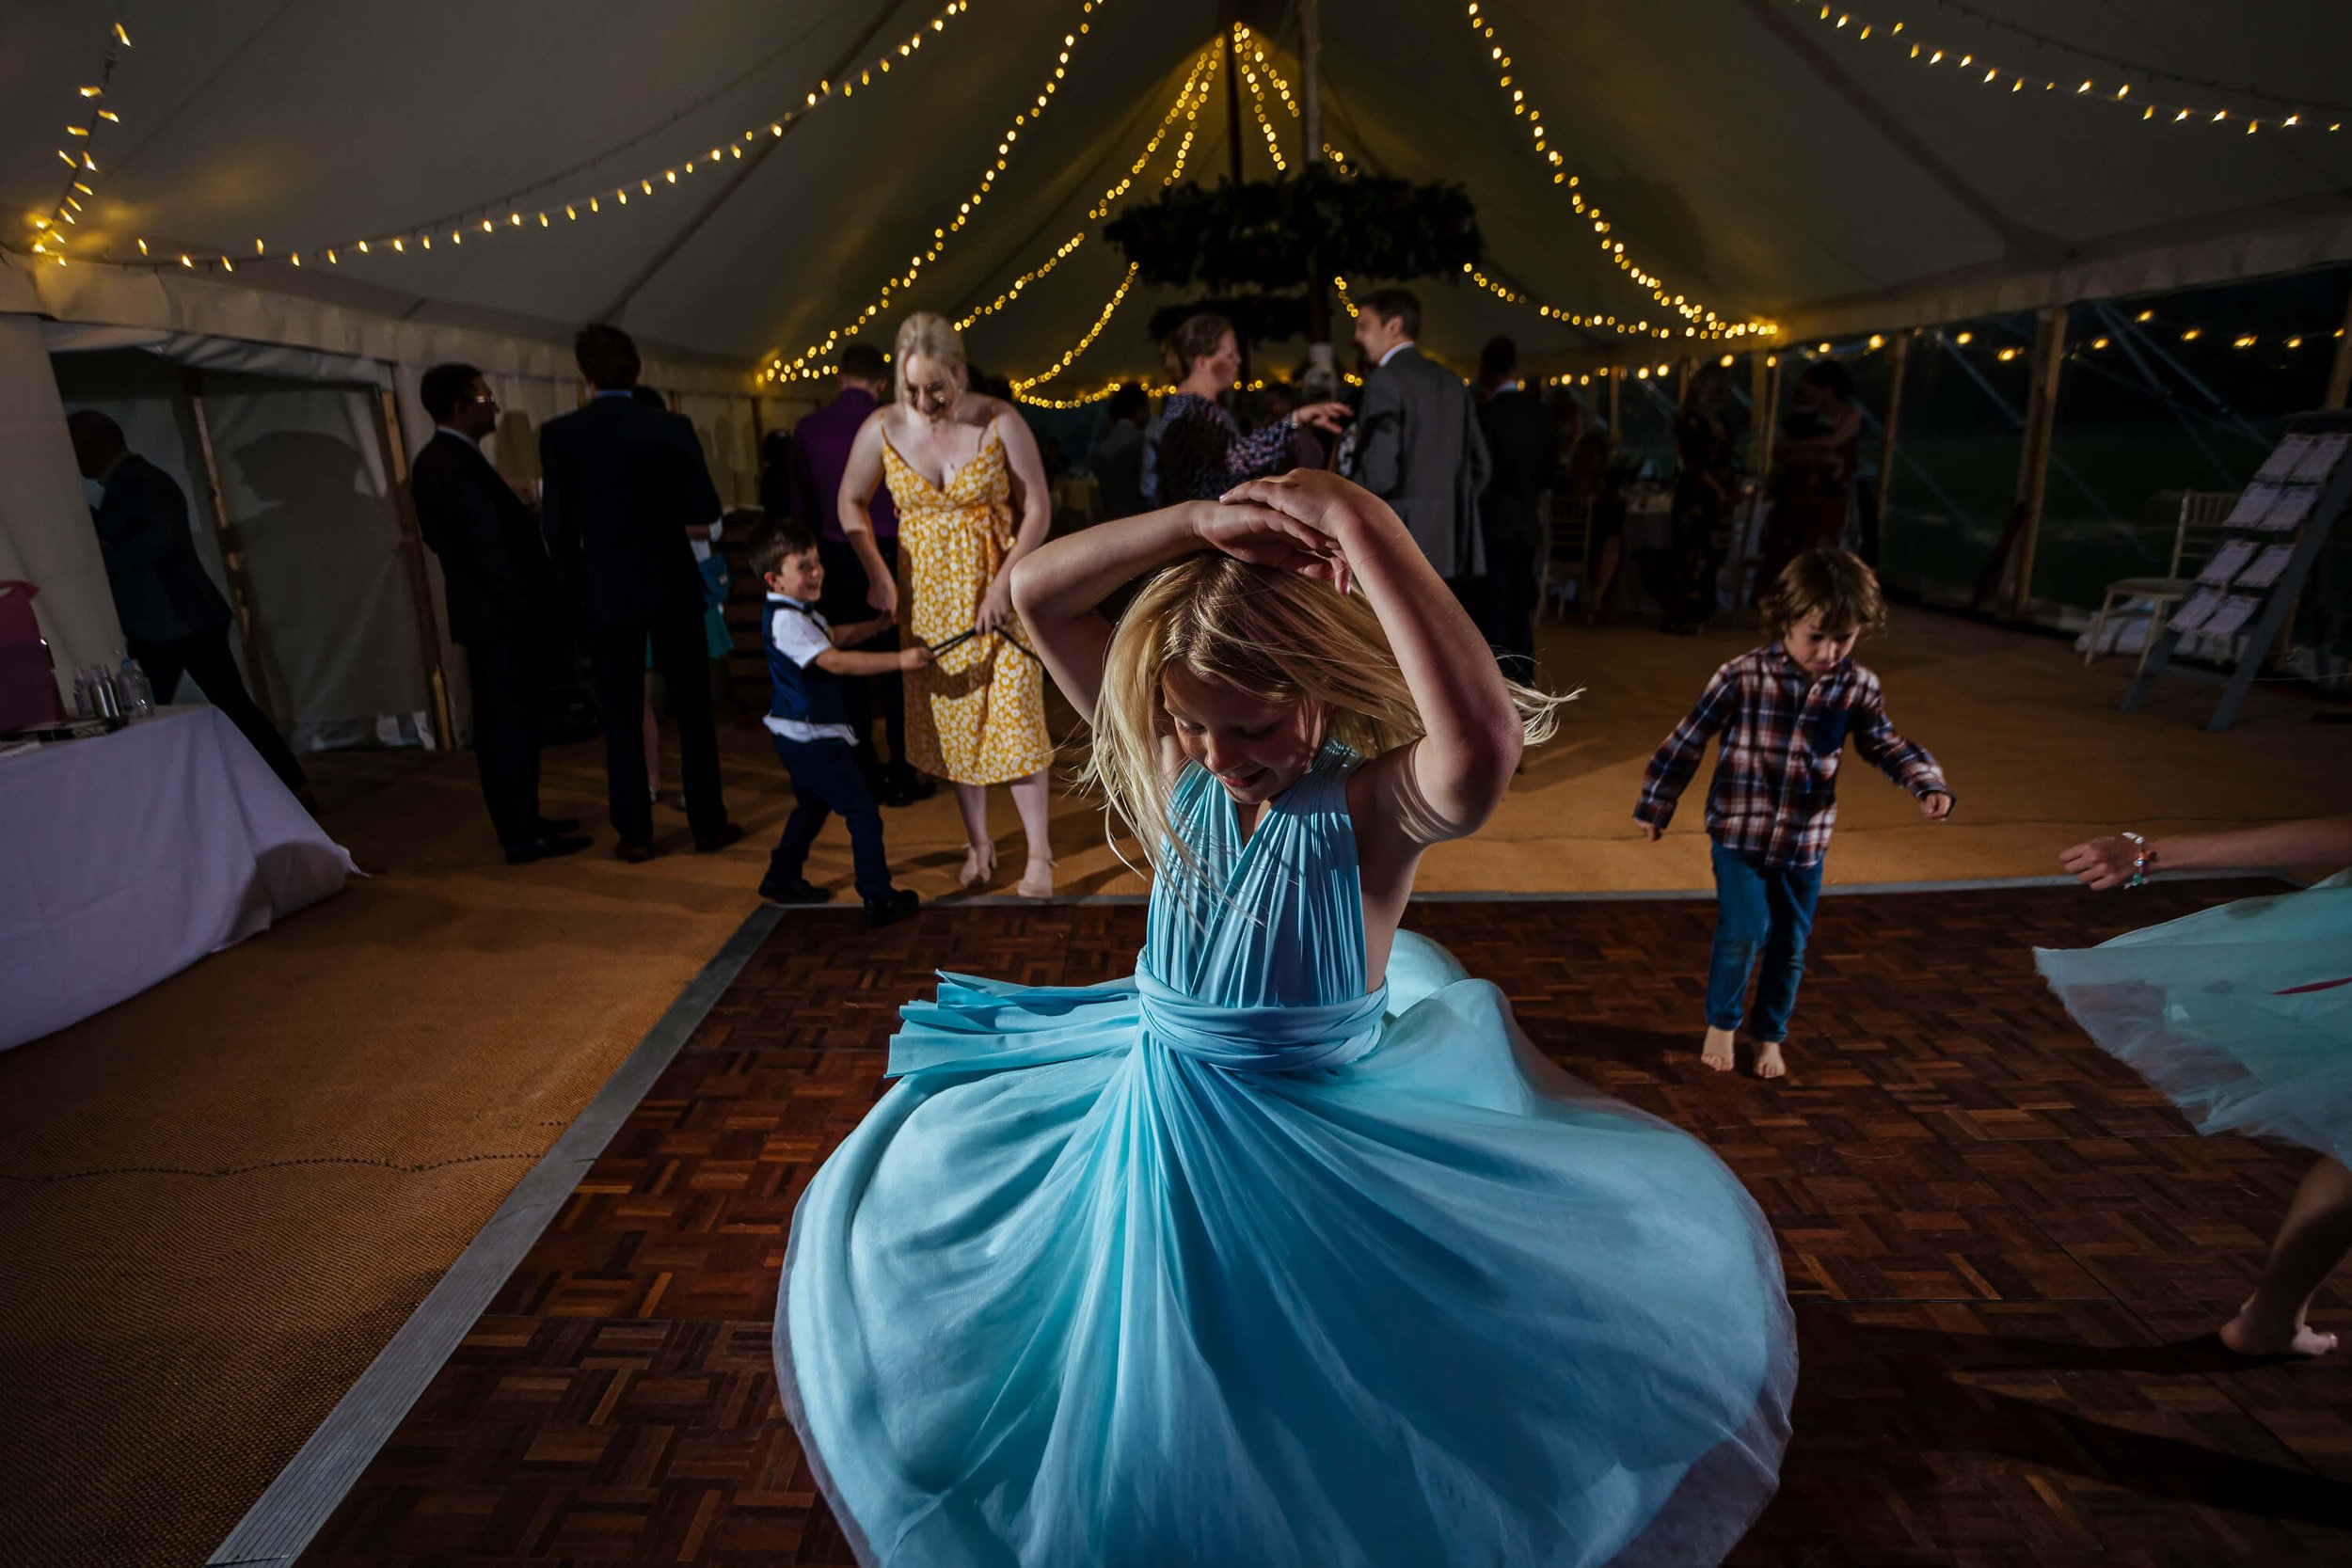 Young girl on the dance floor at a wedding